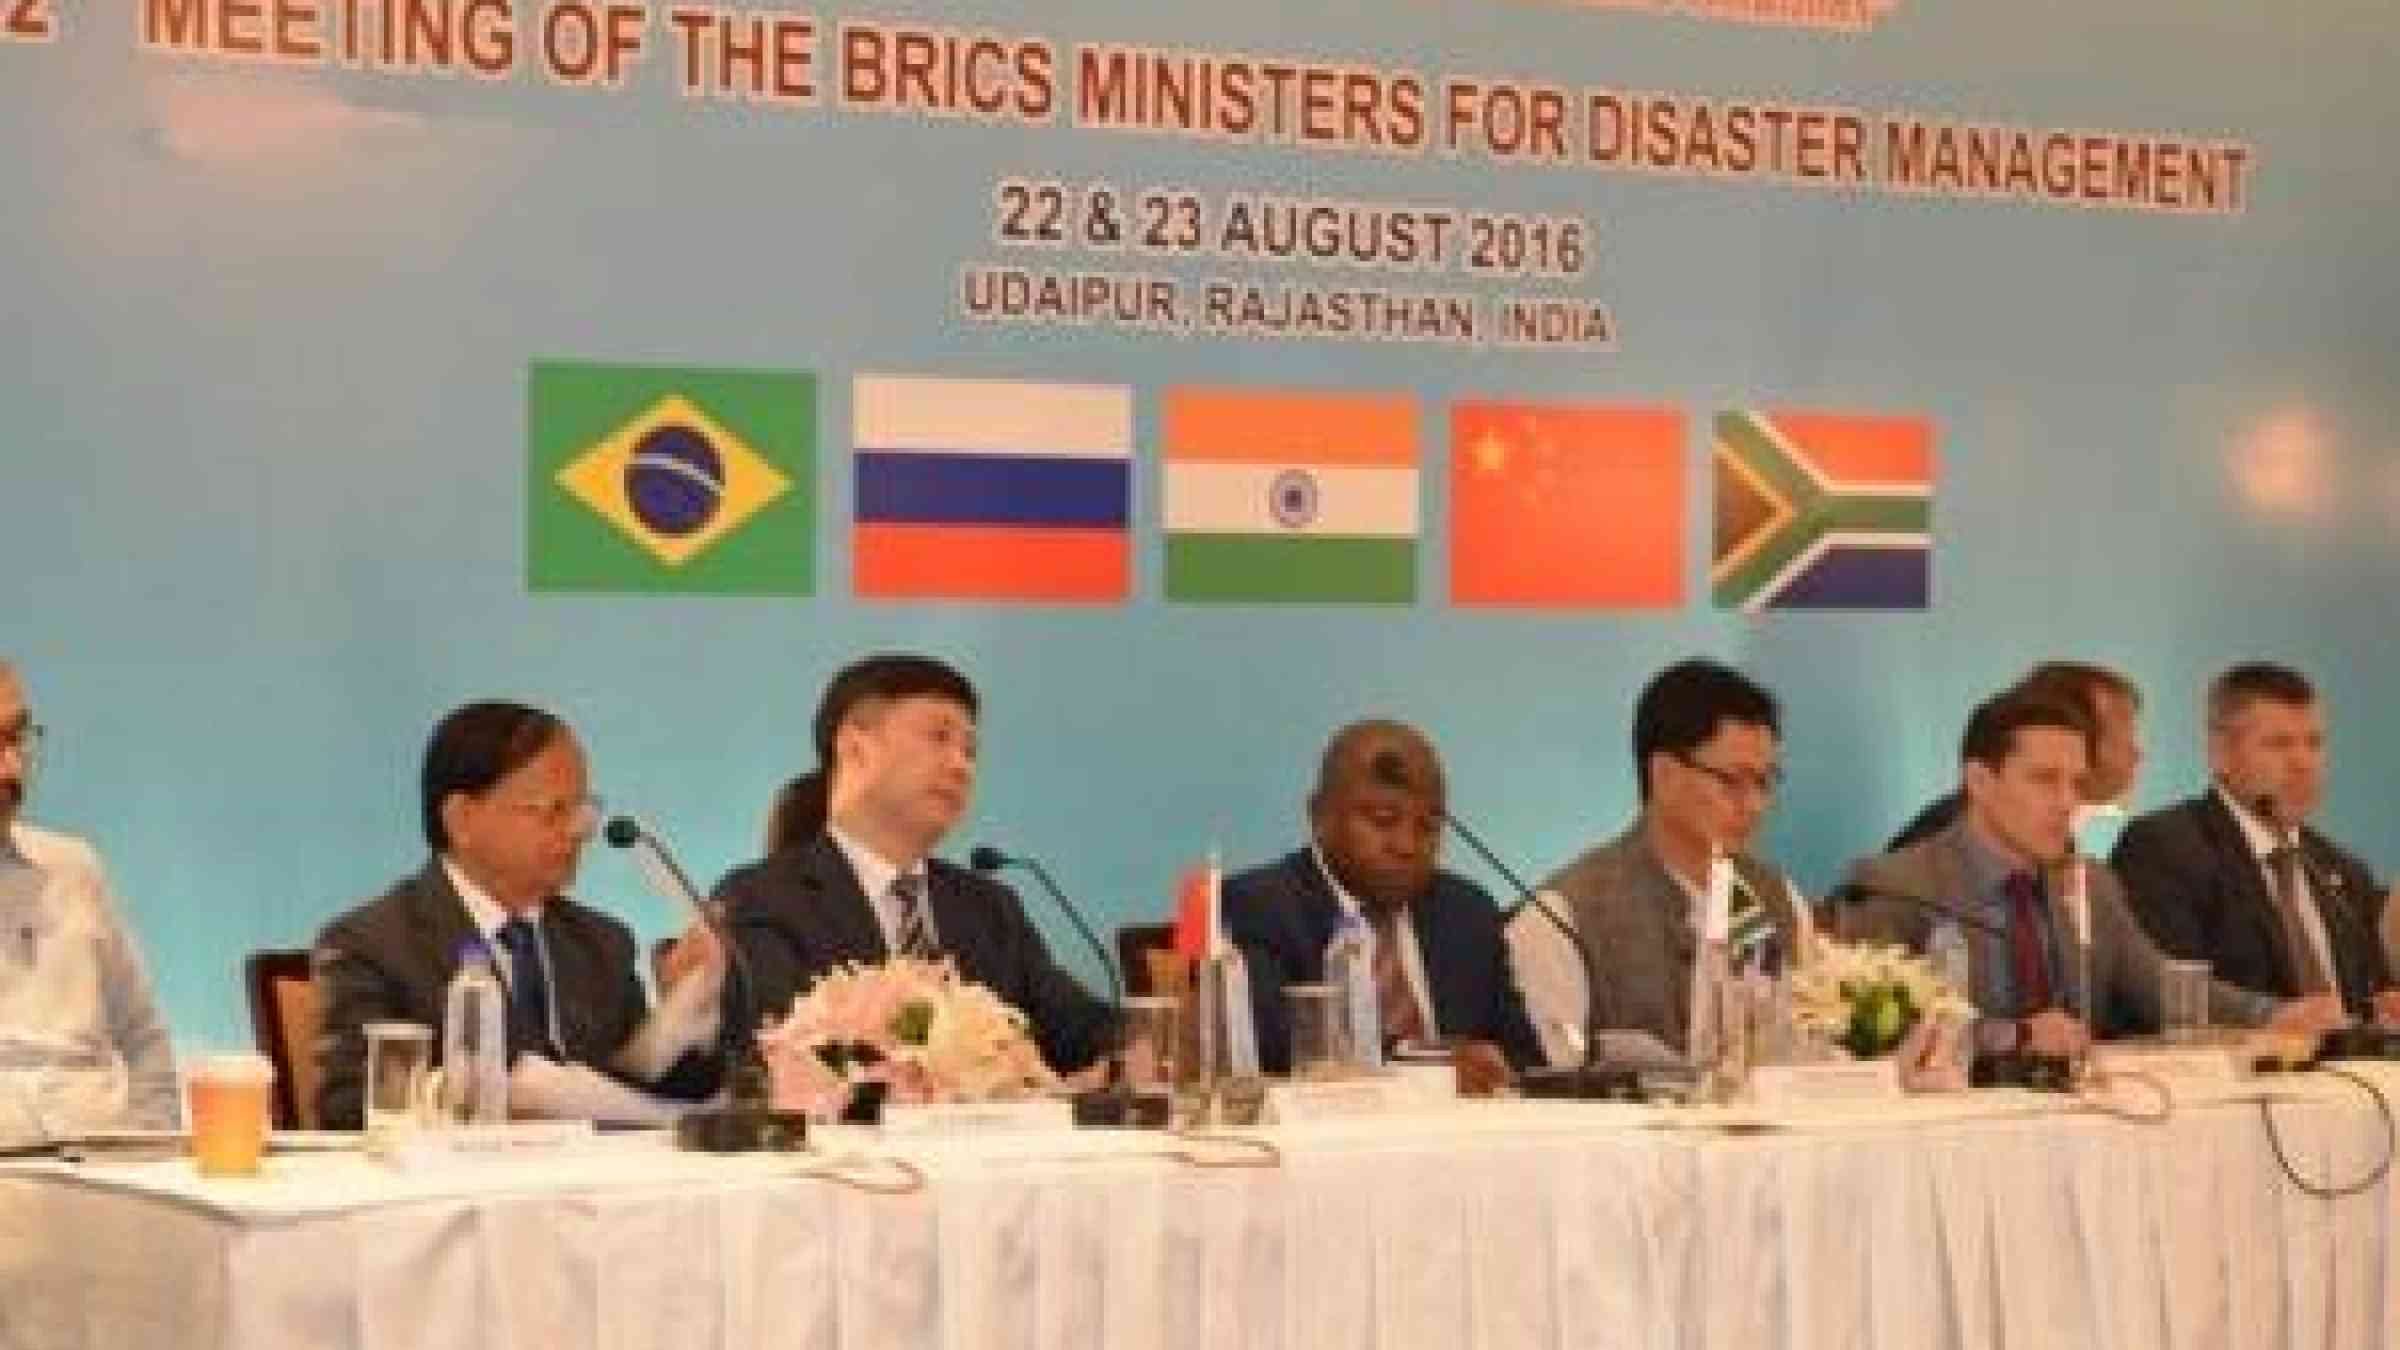 BRICS Ministers met in Udaipur, Rajasthan, over two days to agree collaboration on reducing disaster losses